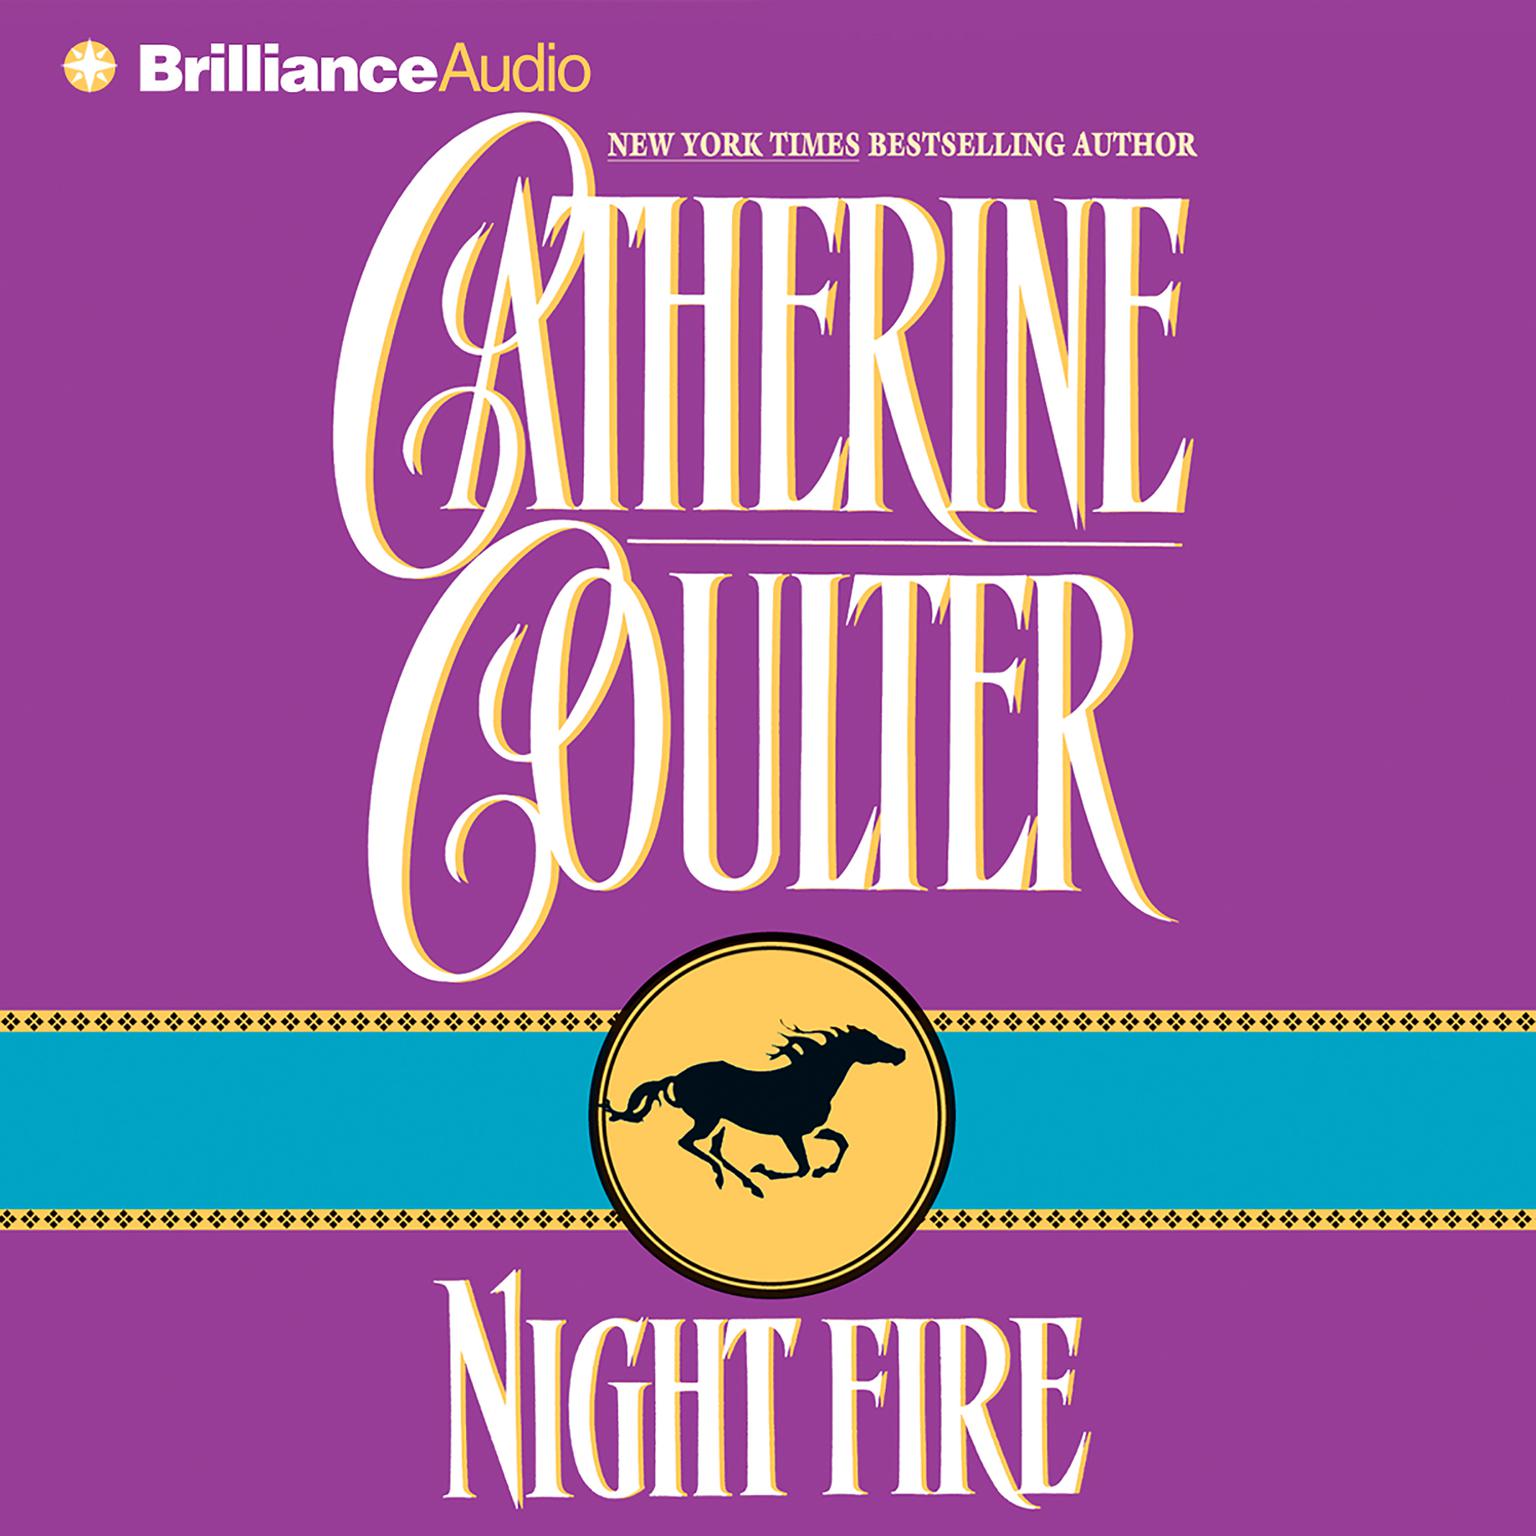 Night Fire (Abridged) Audiobook, by Catherine Coulter